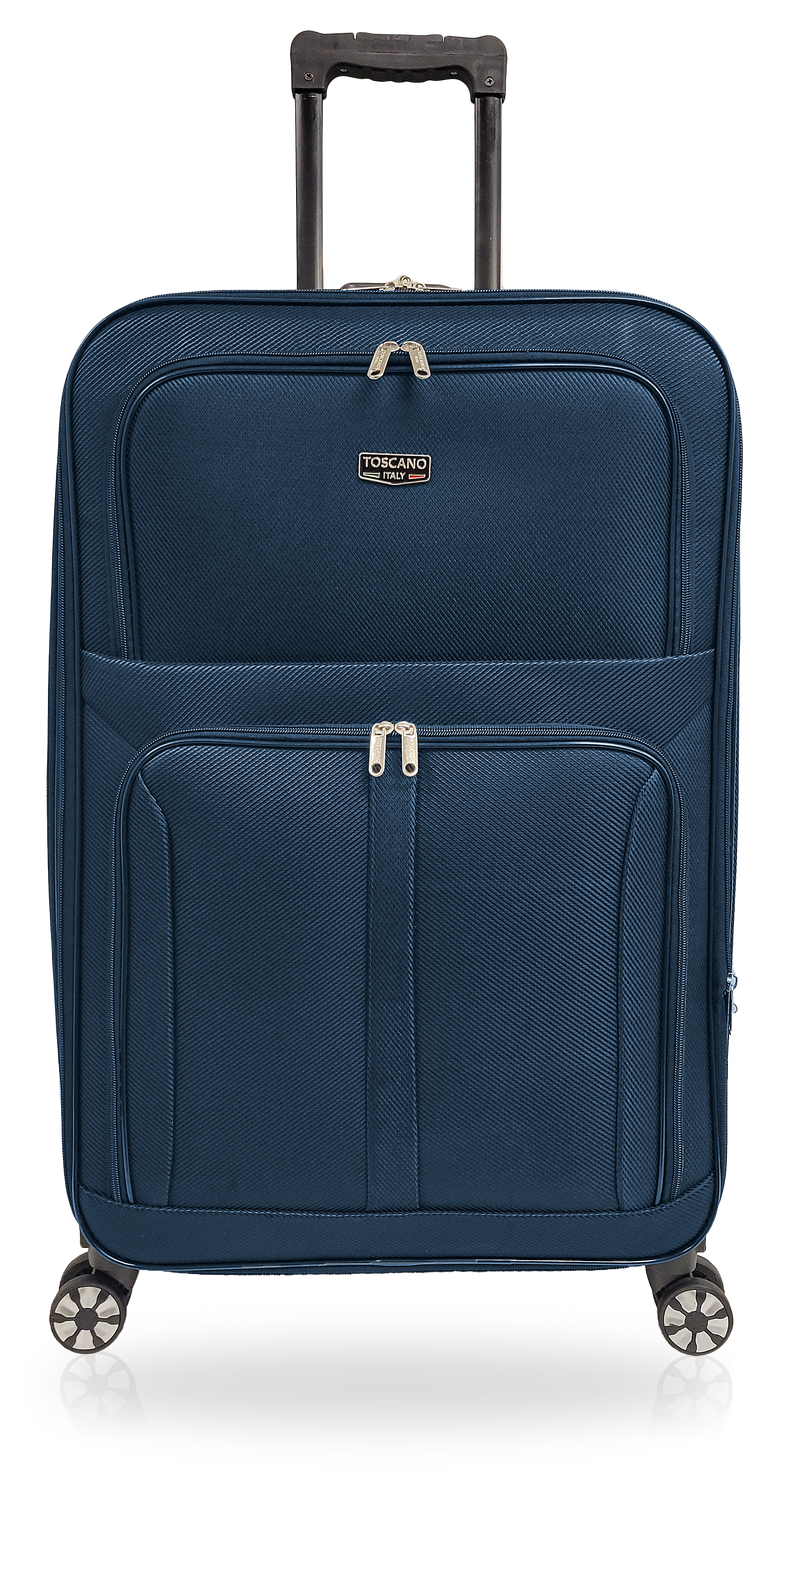 TOSCANO by Tucci Aiutante 23-inch Lightweight Luggage Suitcase